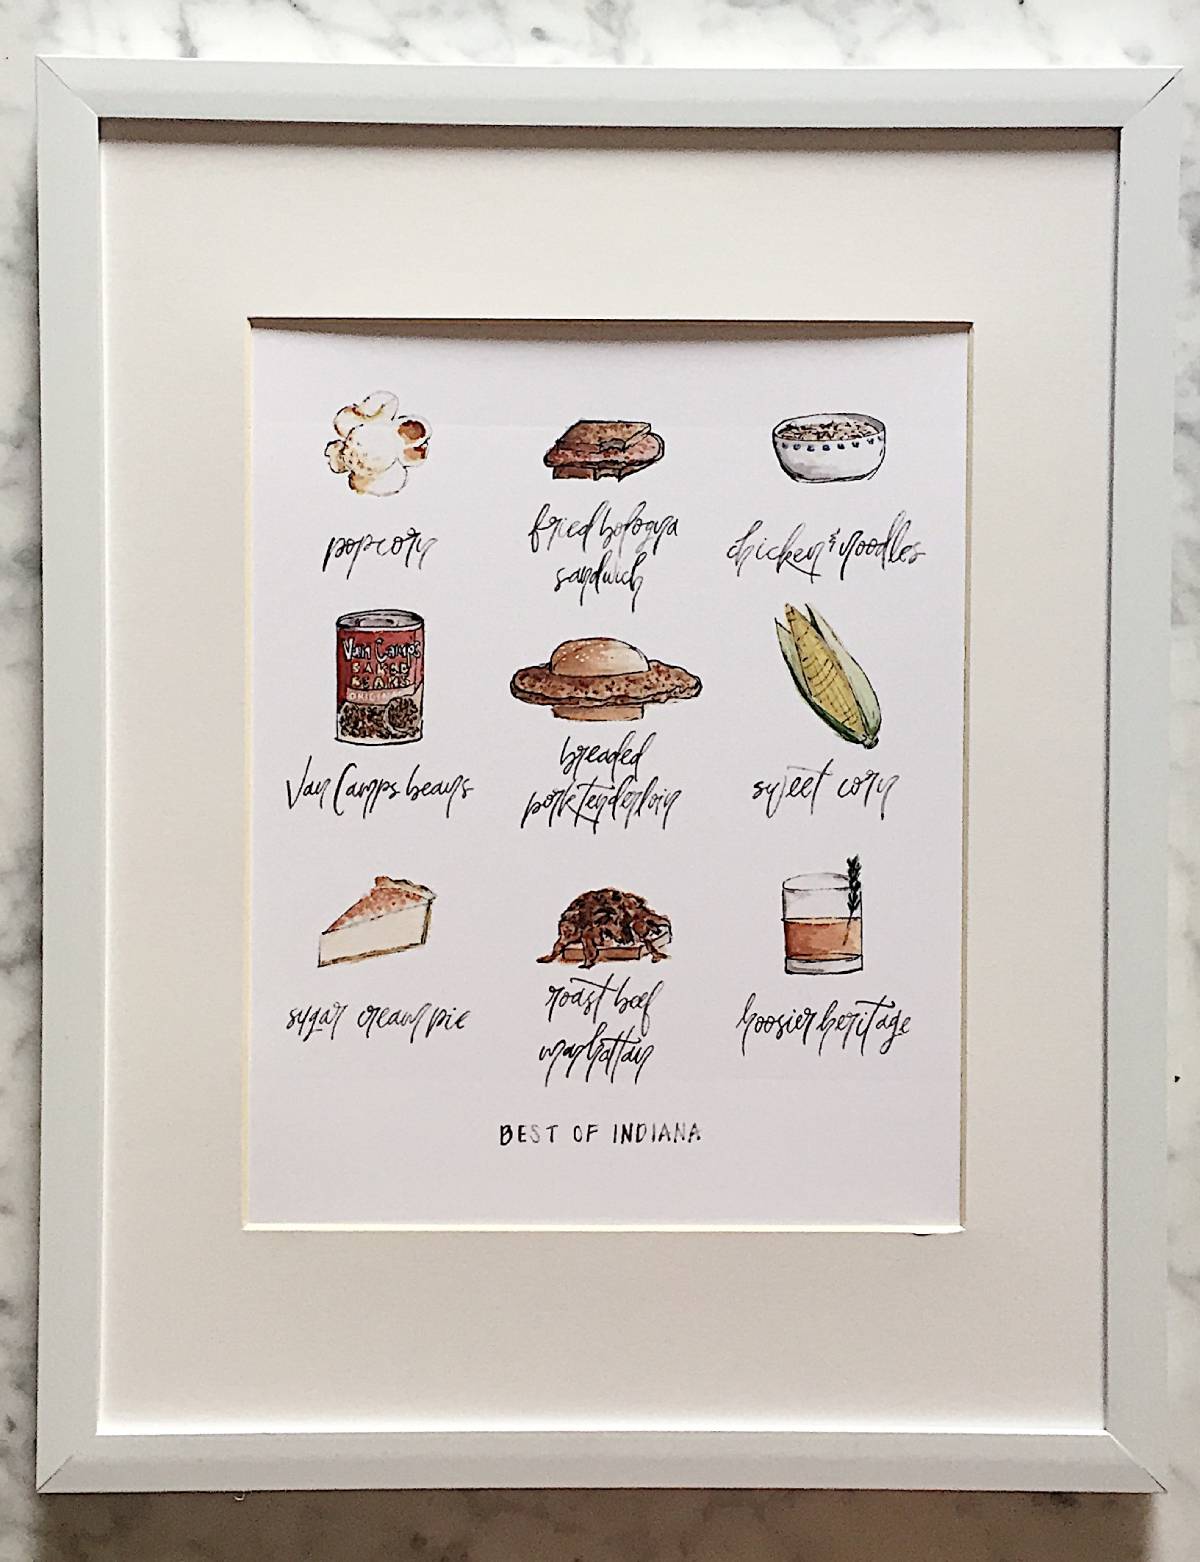 A watercolor art print display popular foods and drinks from the state of Indiana